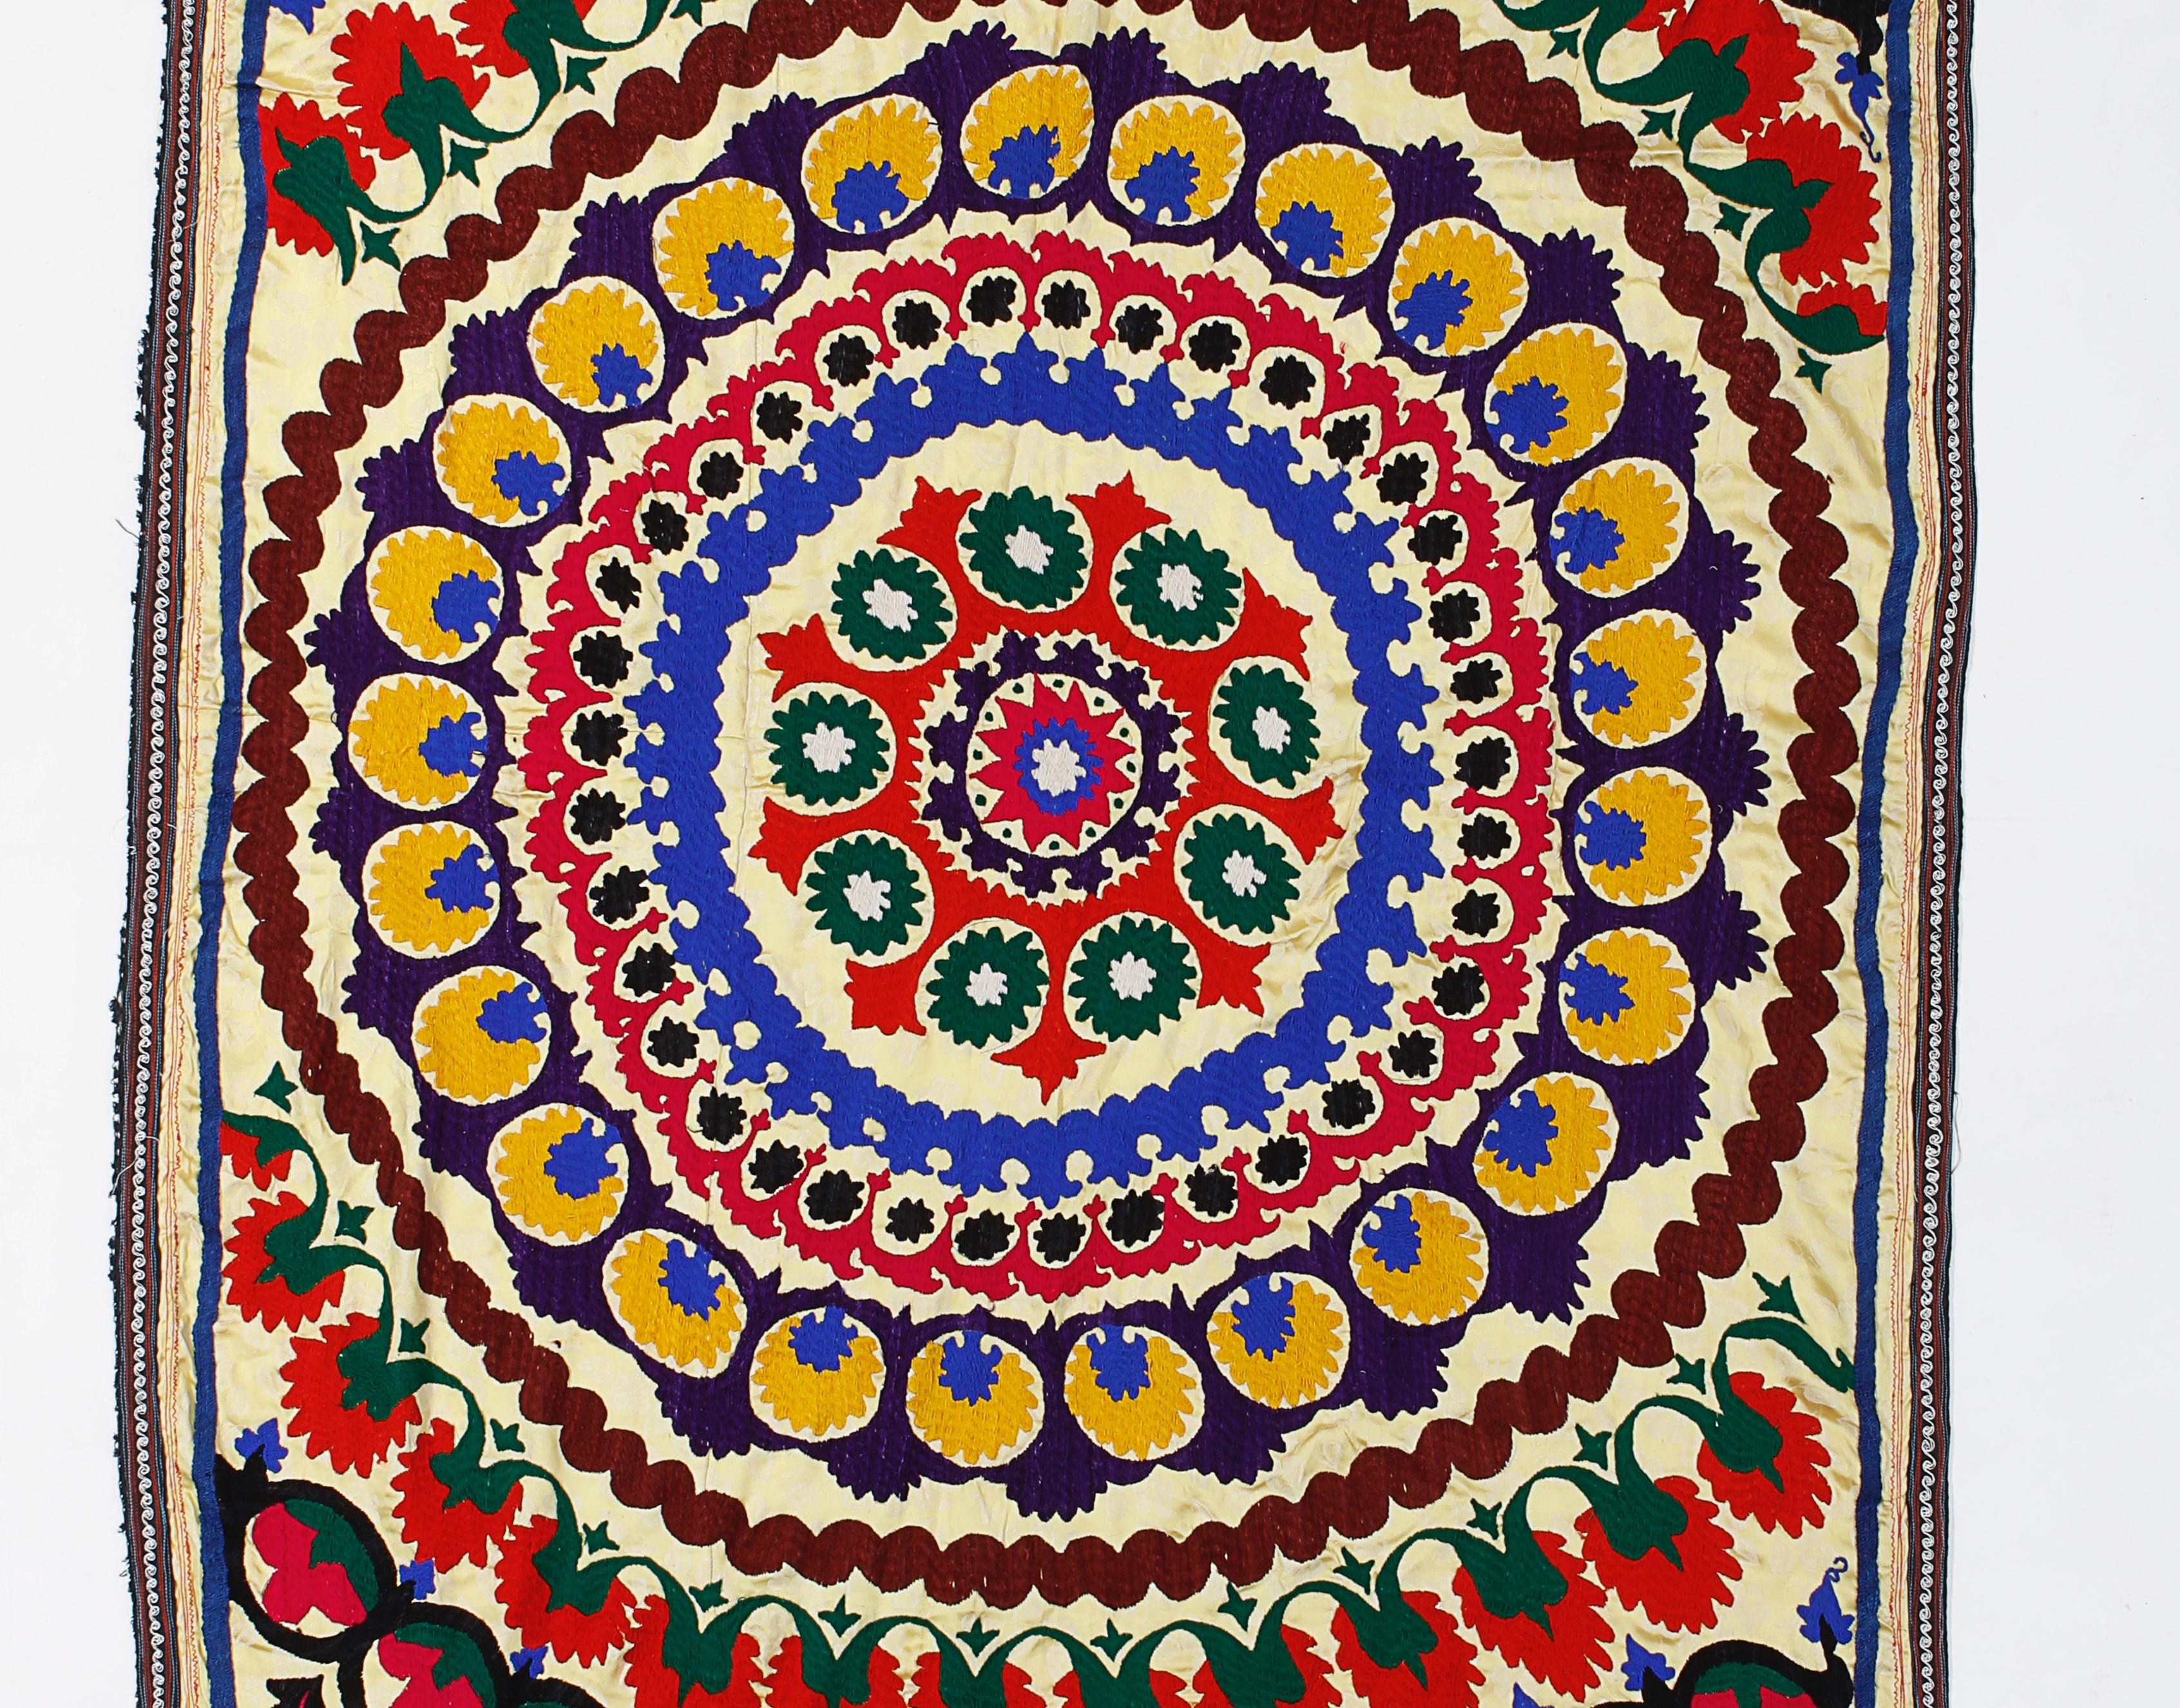 Hand-Woven 4.5x12 Ft Colorful Vintage Silk Embroidery Wall Hanging, Uzbek Suzani Tablecloth For Sale